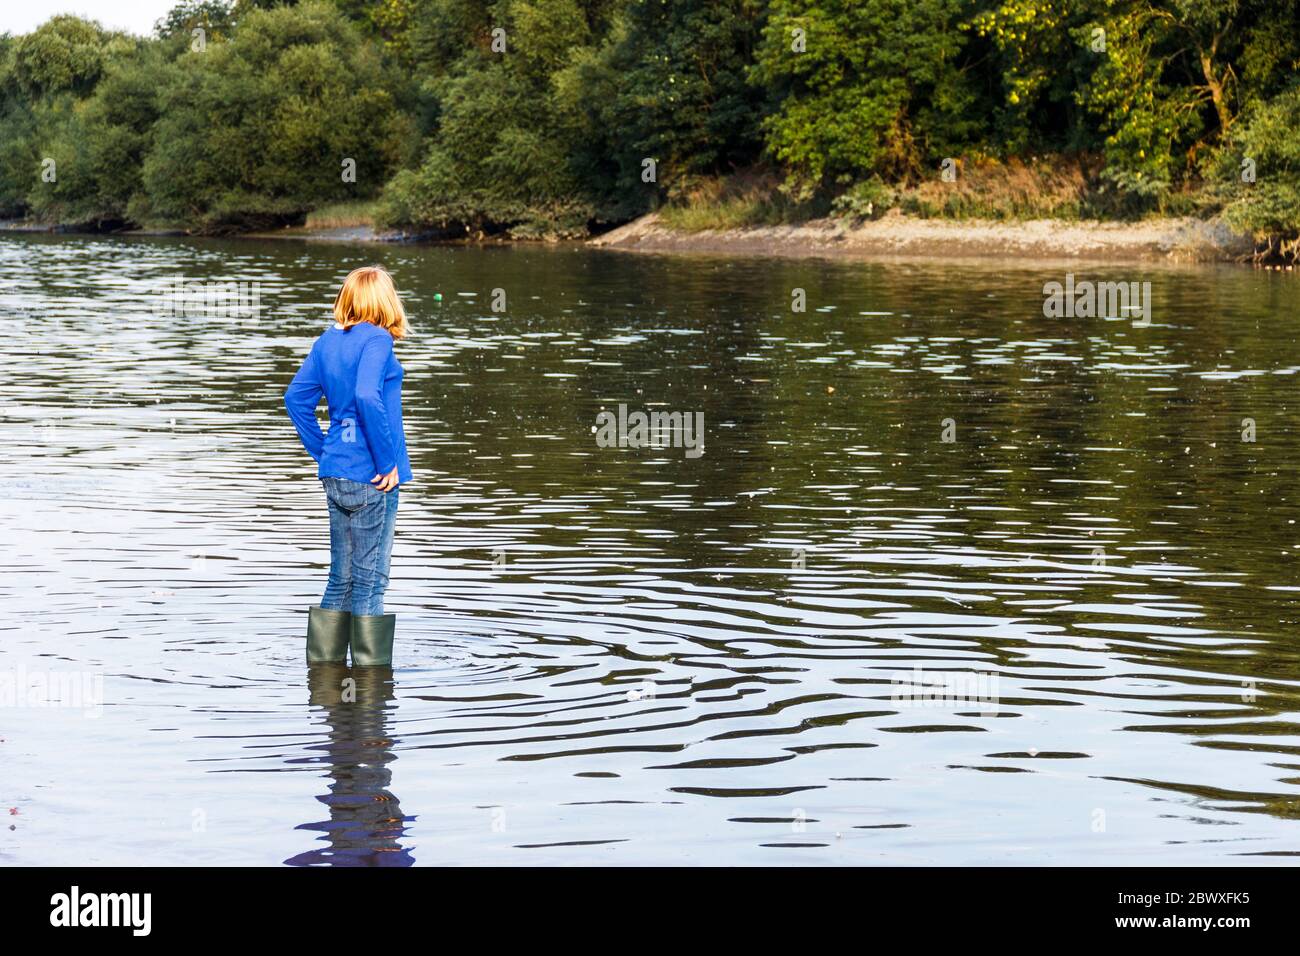 A thirteen year-old girl in wellington boots wading in the River Thames at Isleworth, London, UK Stock Photo